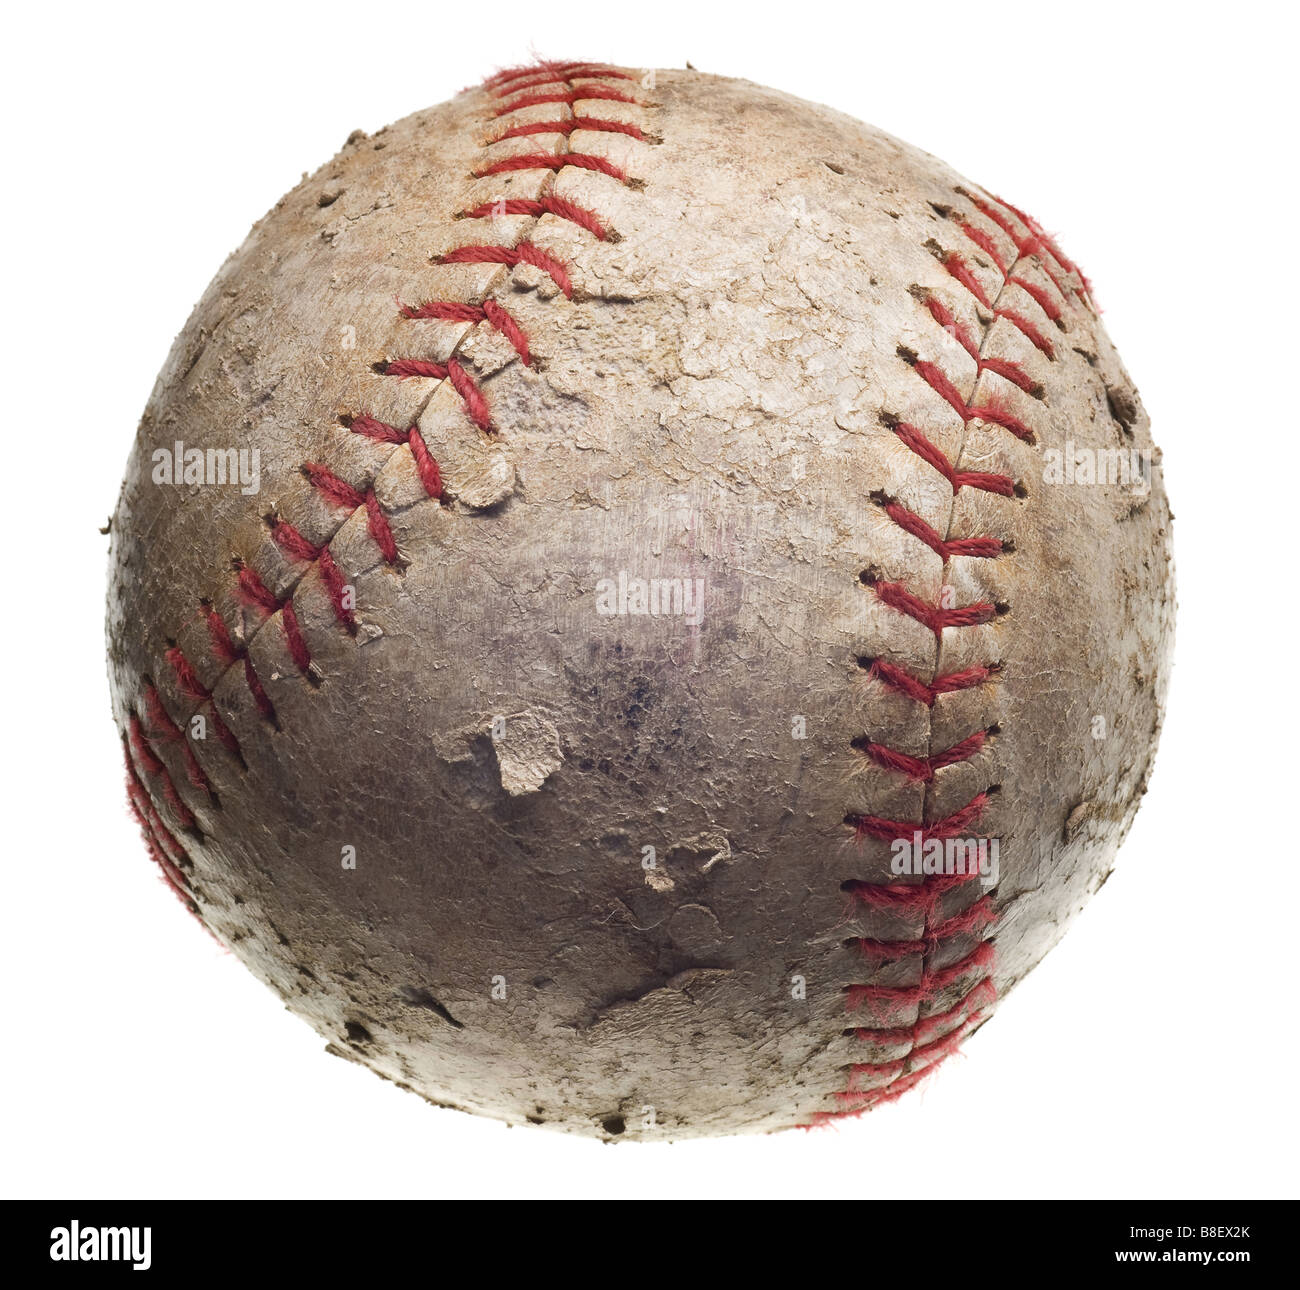 with red stitching baseball isolated on white background Stock Photo